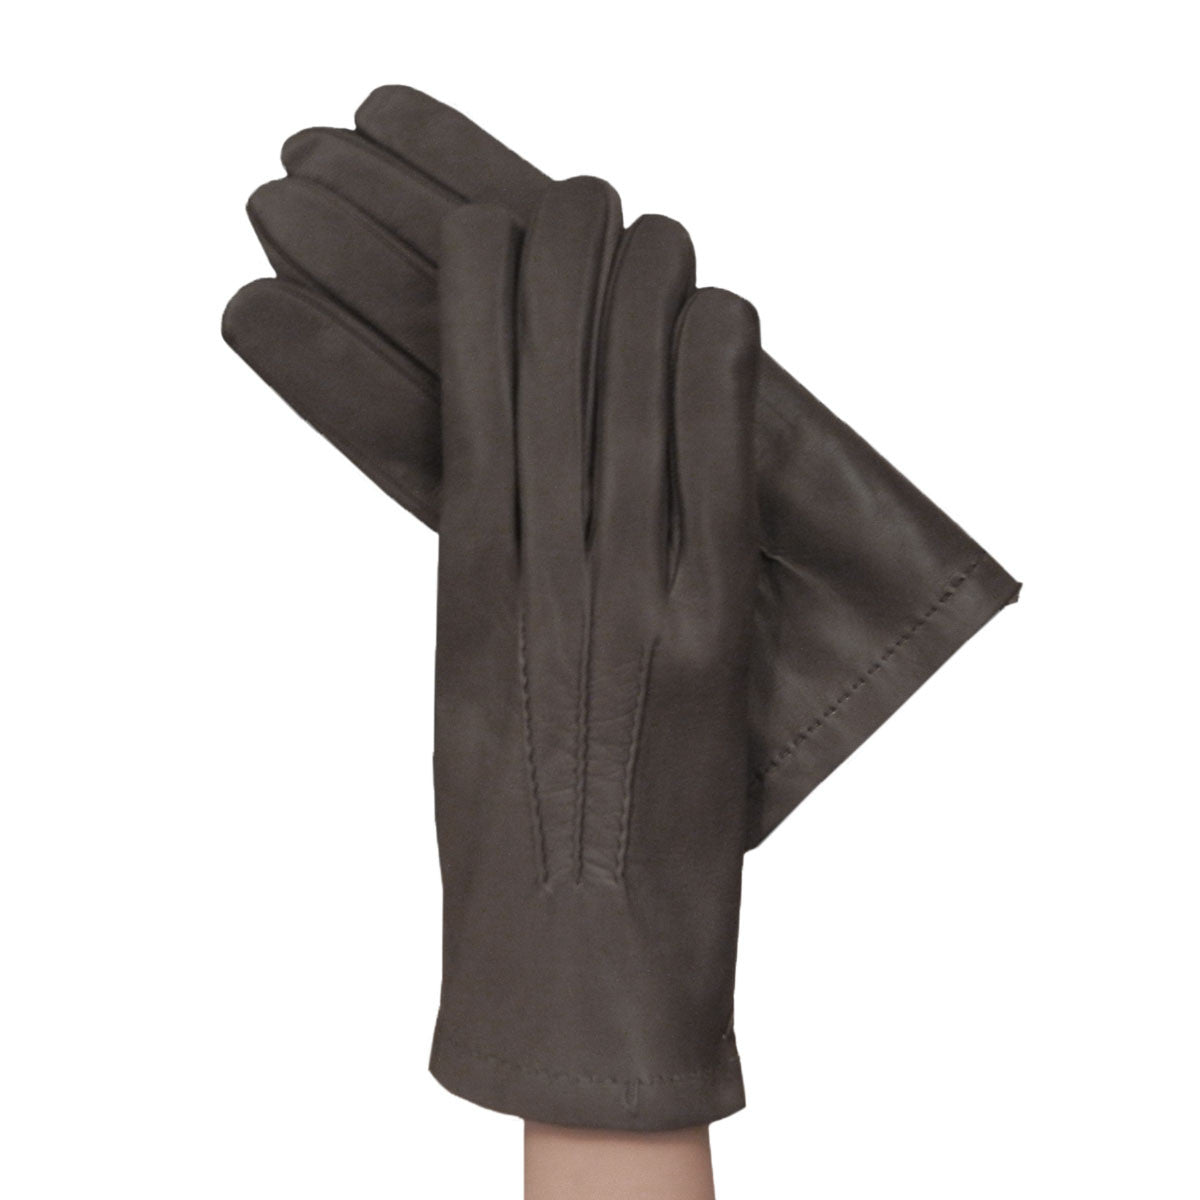 Gray Men's Kidskin Leather Gloves Lined in Cashmere. - Solo Classe